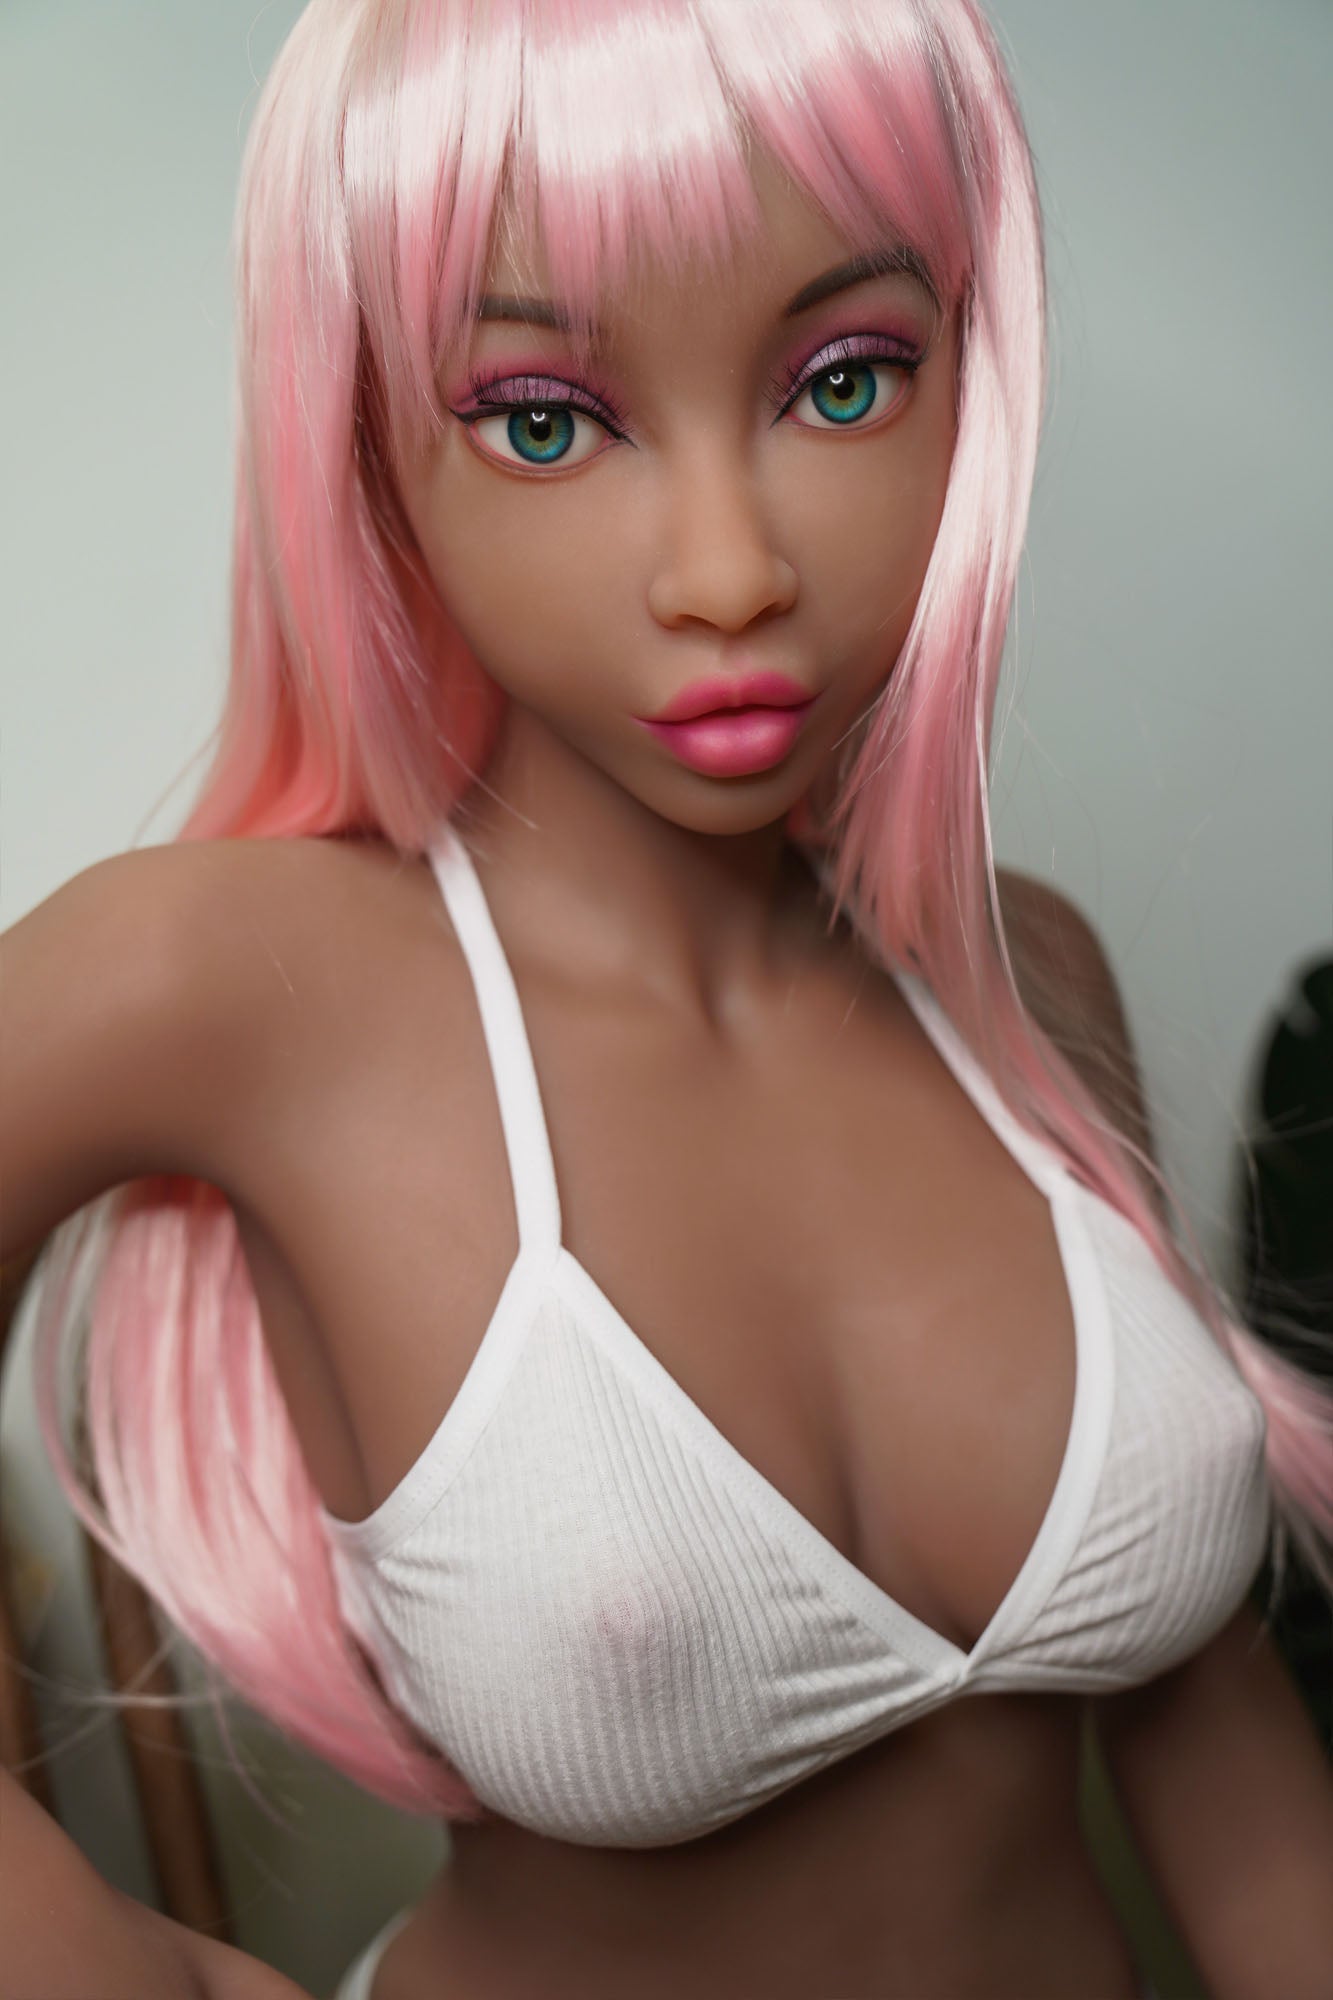 Doll Forever - Real Sex Doll - 4ft 10in (148cm) - Alexis - Love Dolls 4U